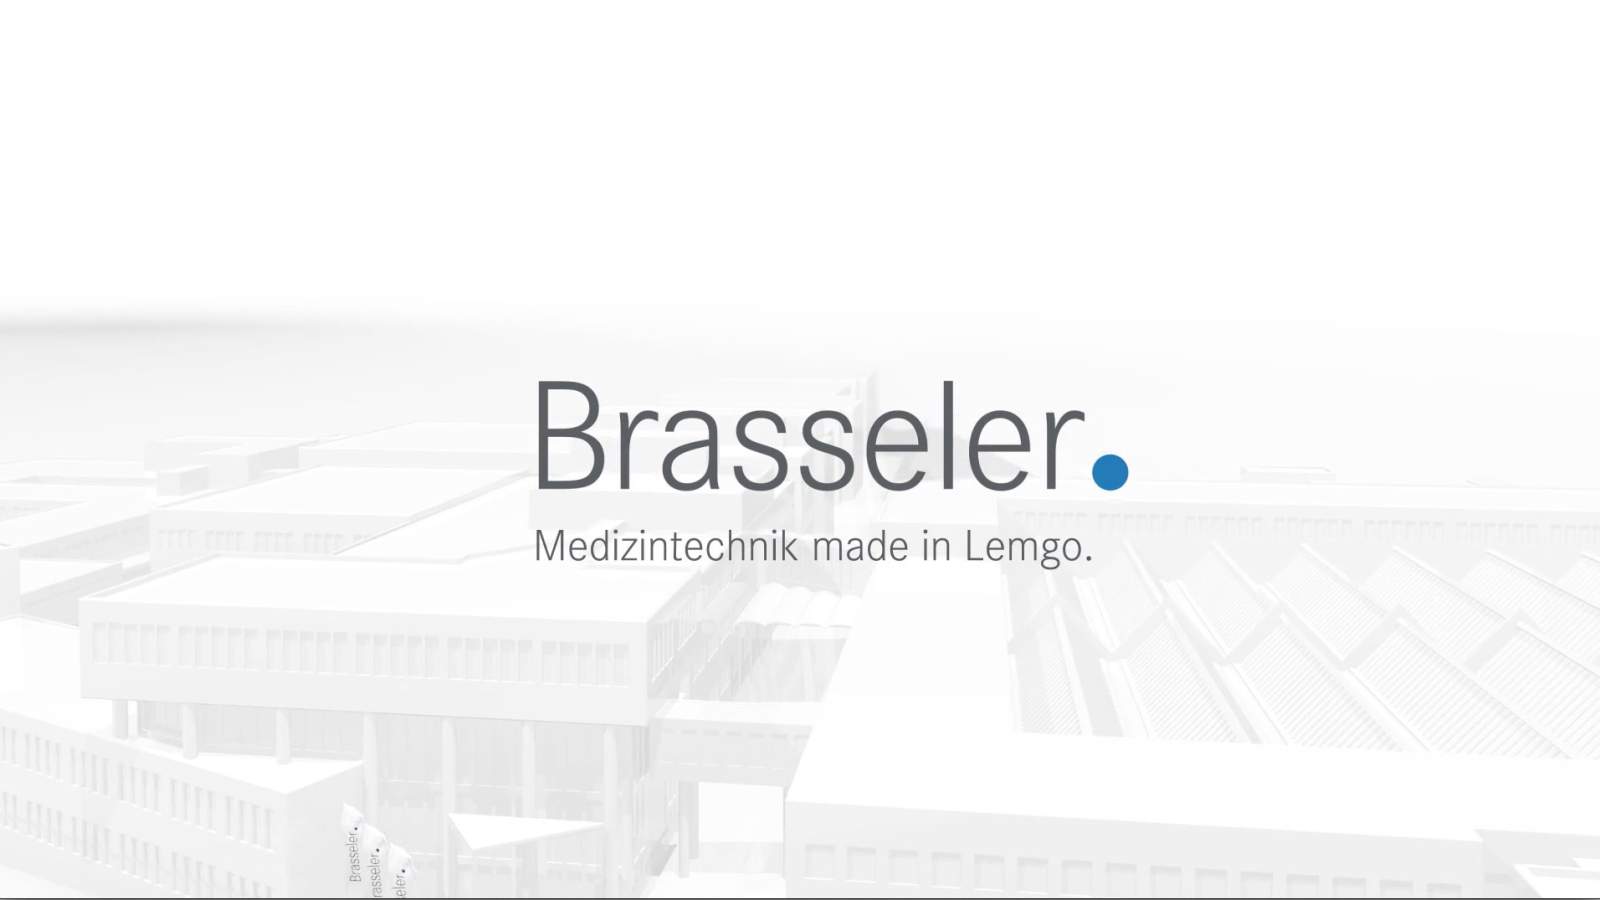 The Medical Technology Group Gebr. Brasseler Lemgo appoints a new Managing Director